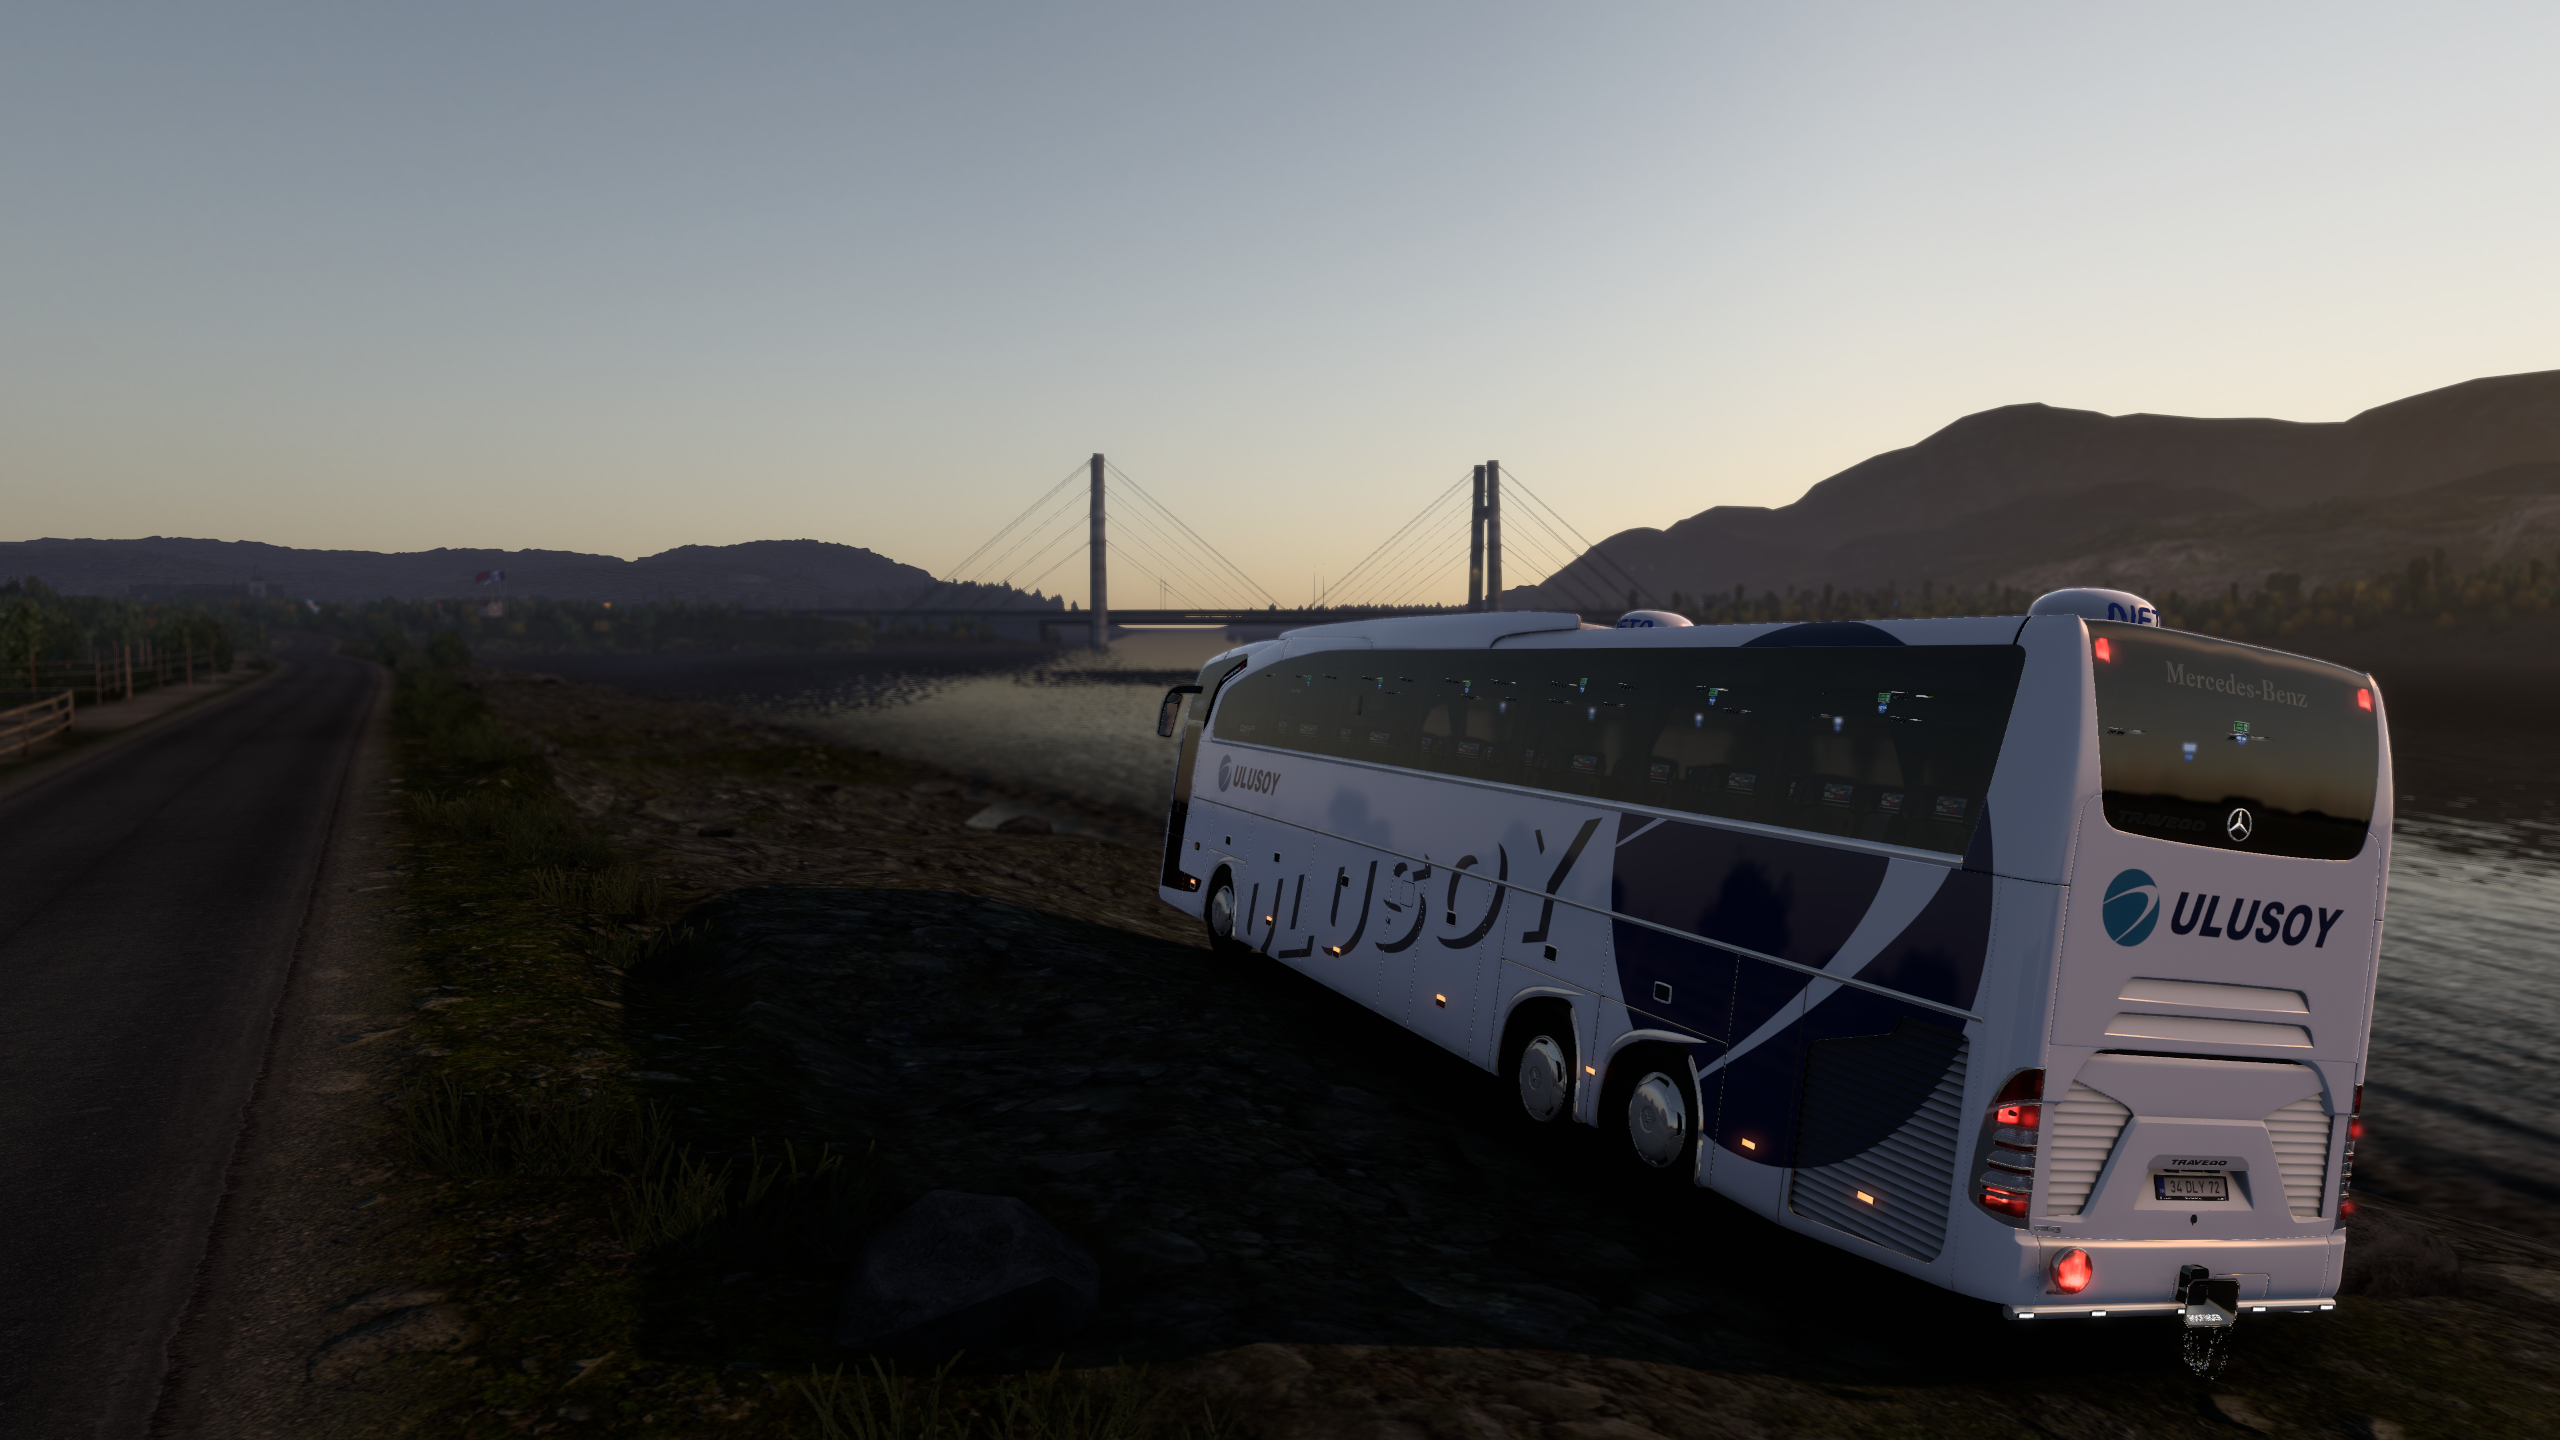 ets2_20211027_234750_00.png